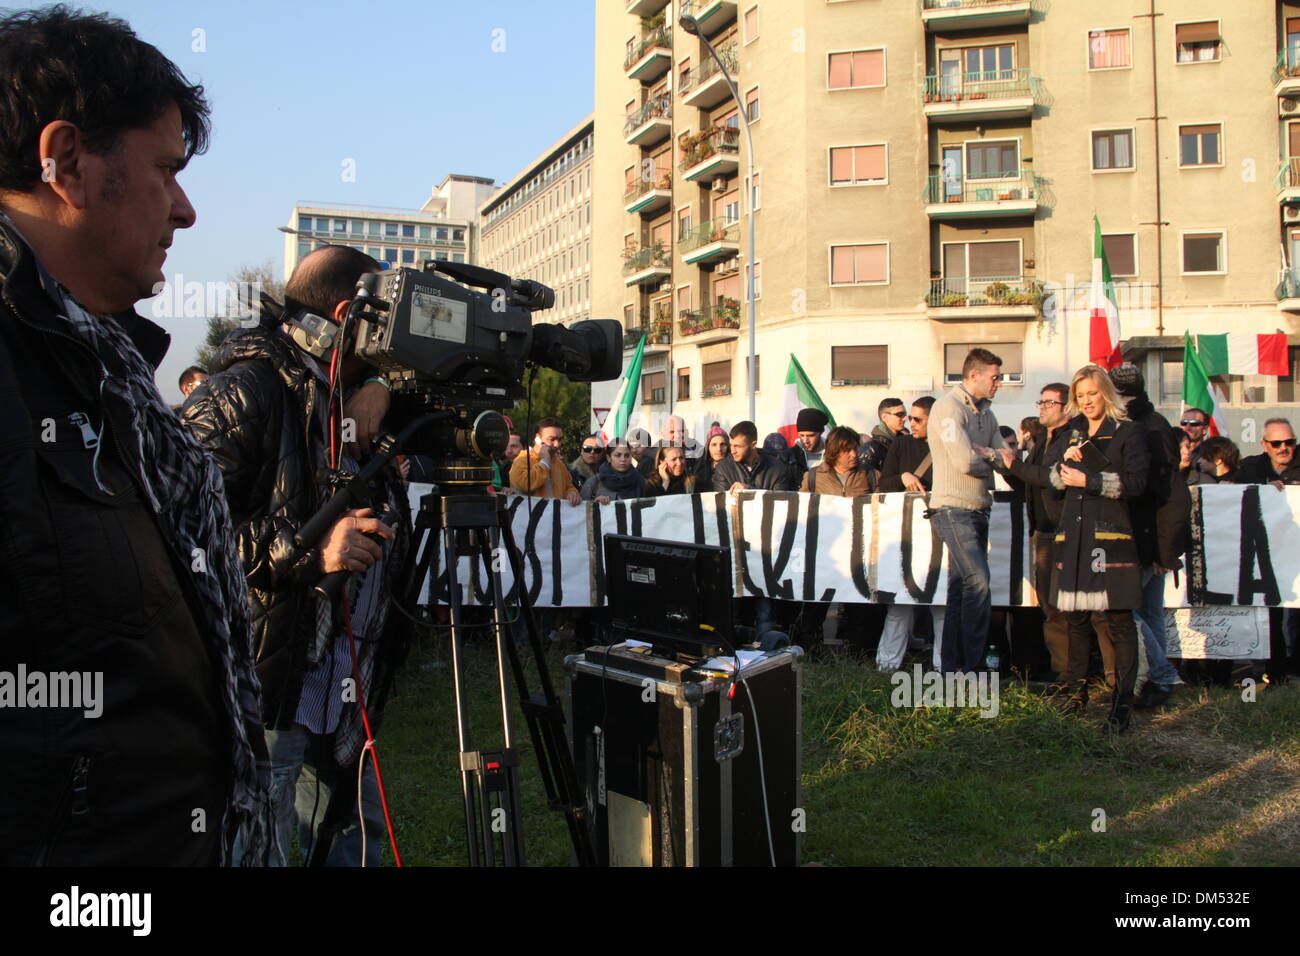 Rome, Italy. 11th December 2013. The 'pitchfork movement' protesters against ineffective government, austerity and recession congregate in Piazzale dei Partigiani, Rome, Ital Credit:  Gari Wyn Williams/Alamy Live News Stock Photo